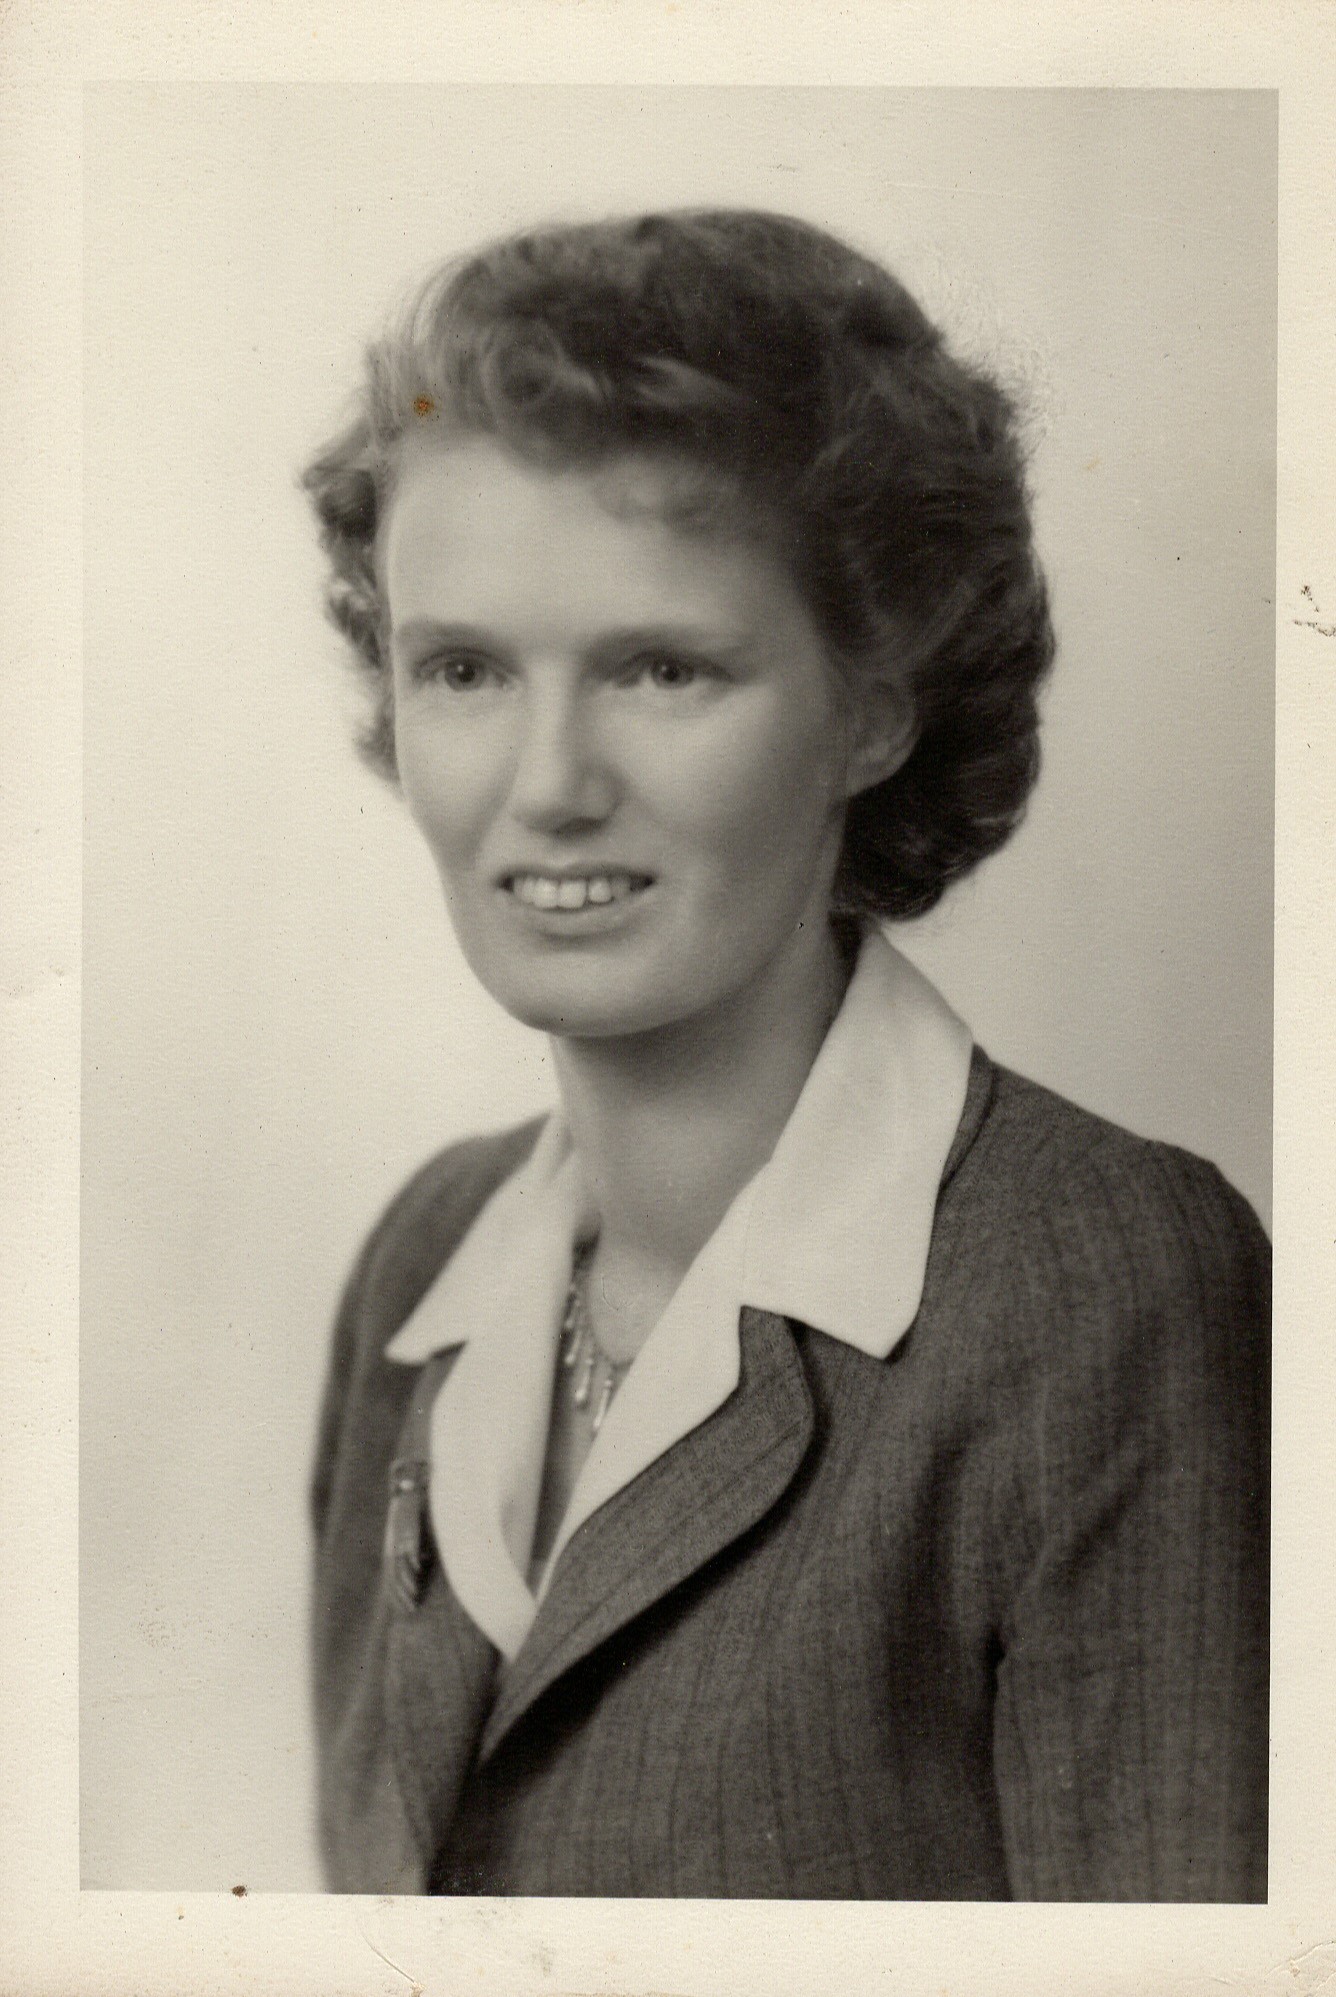 Photograph of Marmie Chivers